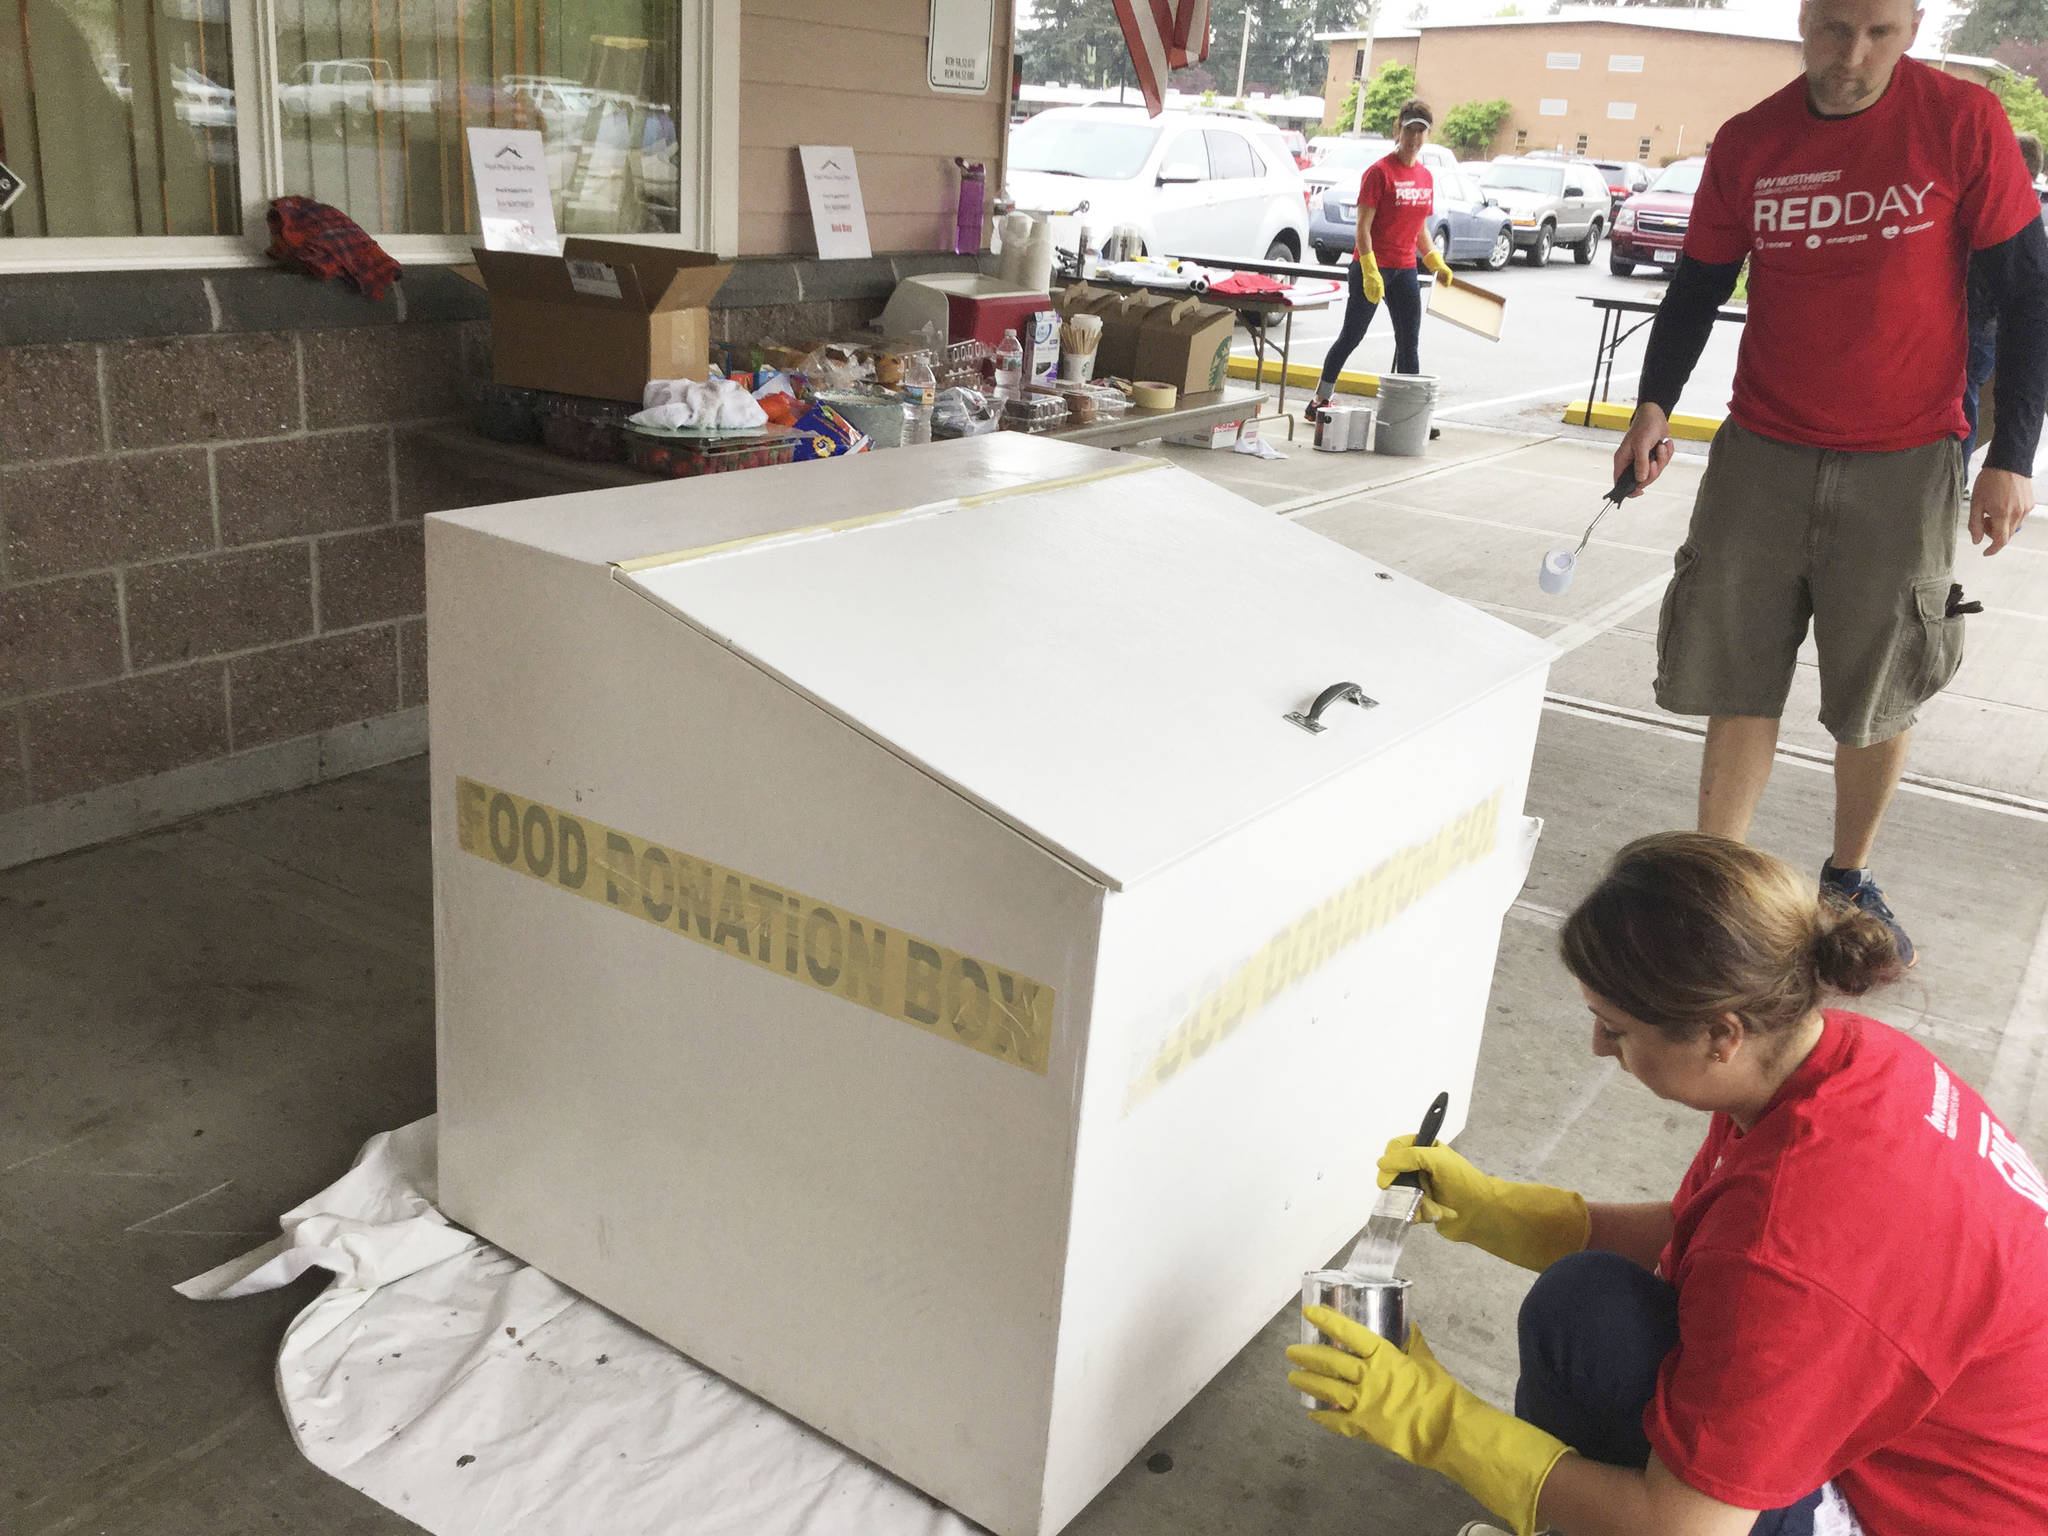 Realty workers give food bank a Red Day makeover